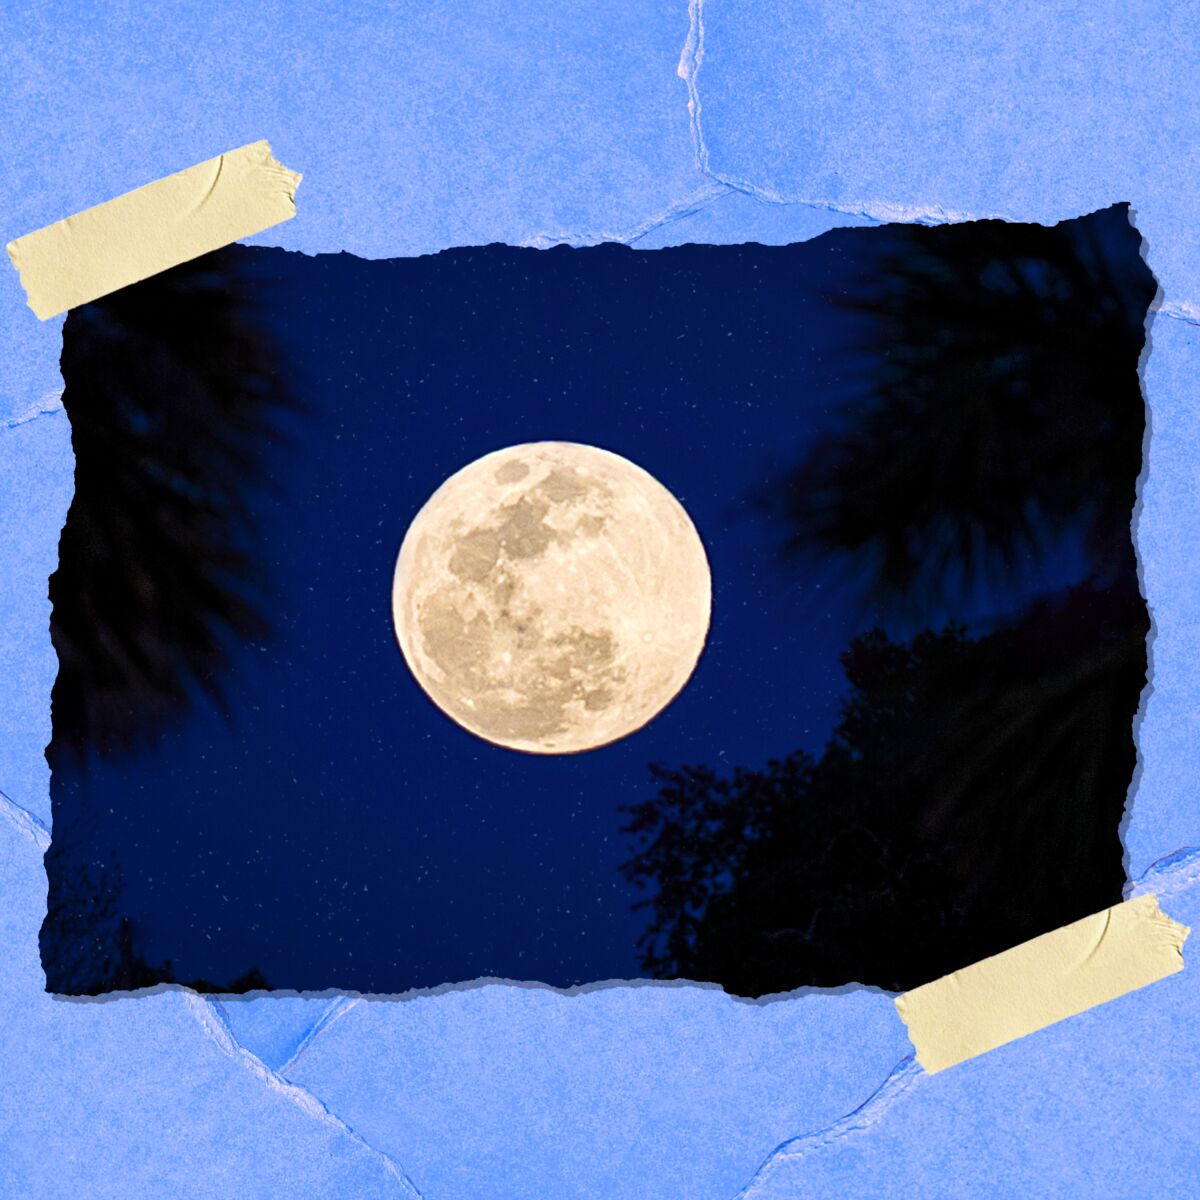 A full moon in a blue night sky with stars and silhouetted palm trees.